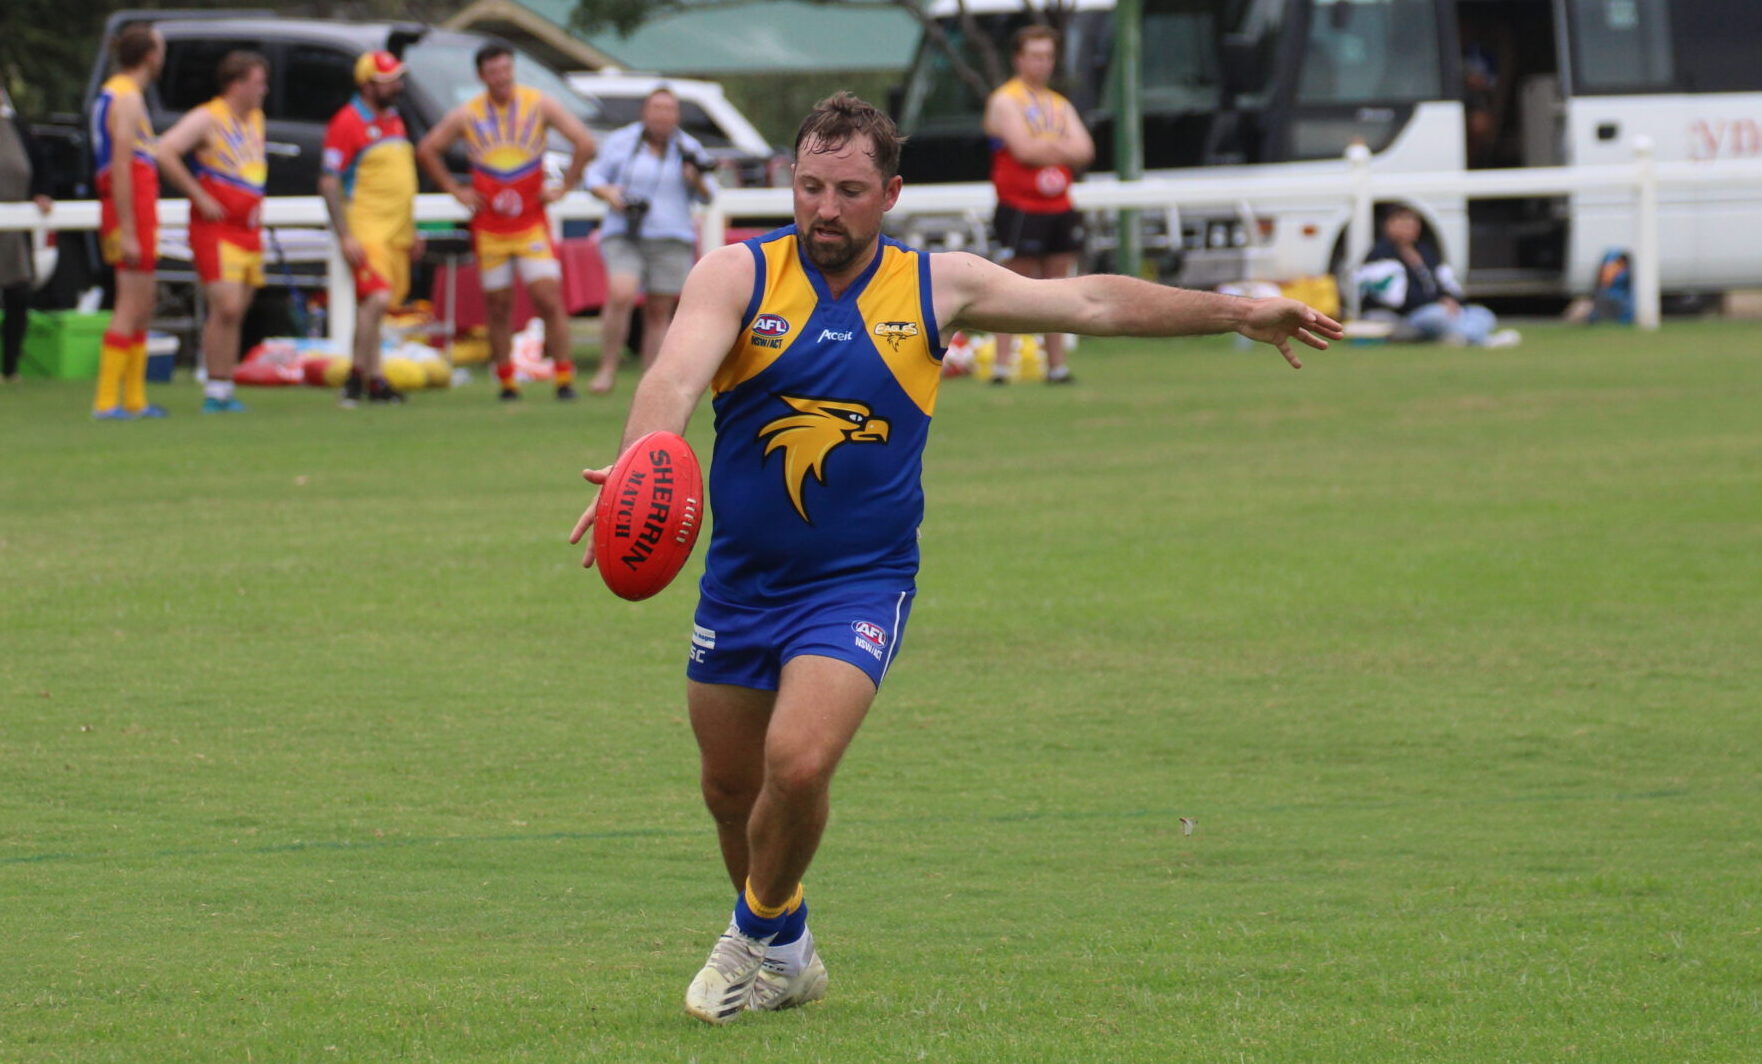 Eagles-Suns determined to bounce back in first outing at Leitch Oval